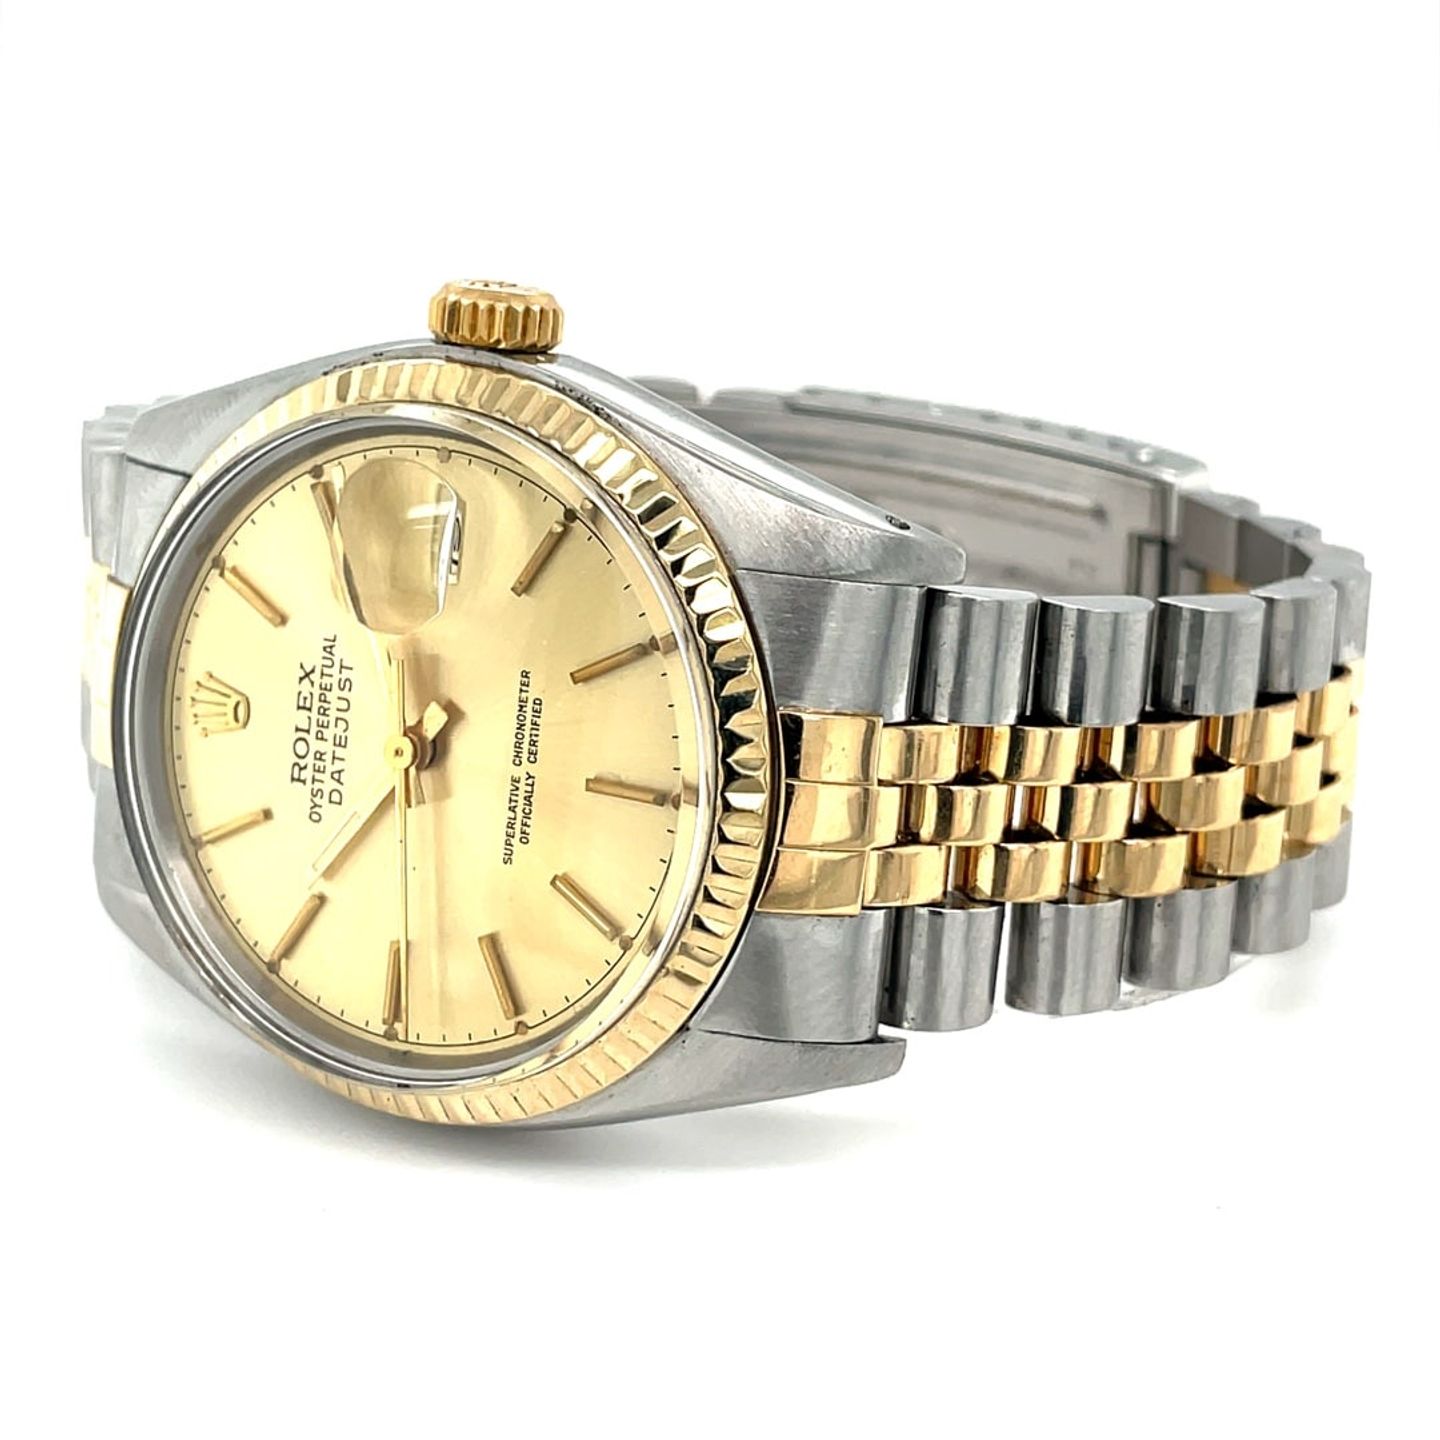 Rolex Datejust 36 16013 (1977) - Champagne dial 36 mm Gold/Steel case (6/8)